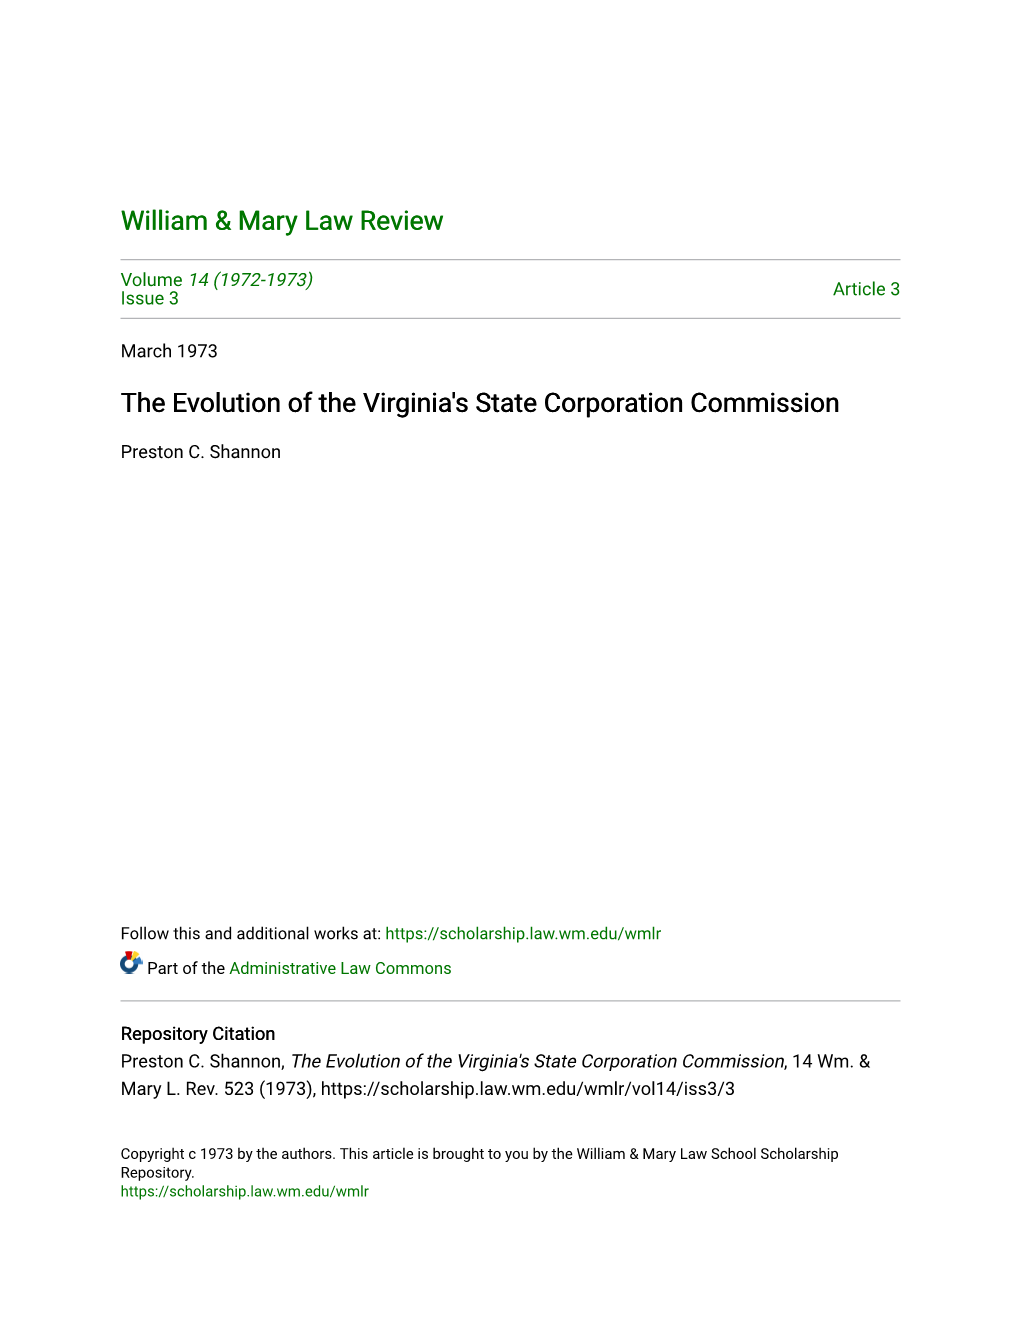 The Evolution of the Virginia's State Corporation Commission